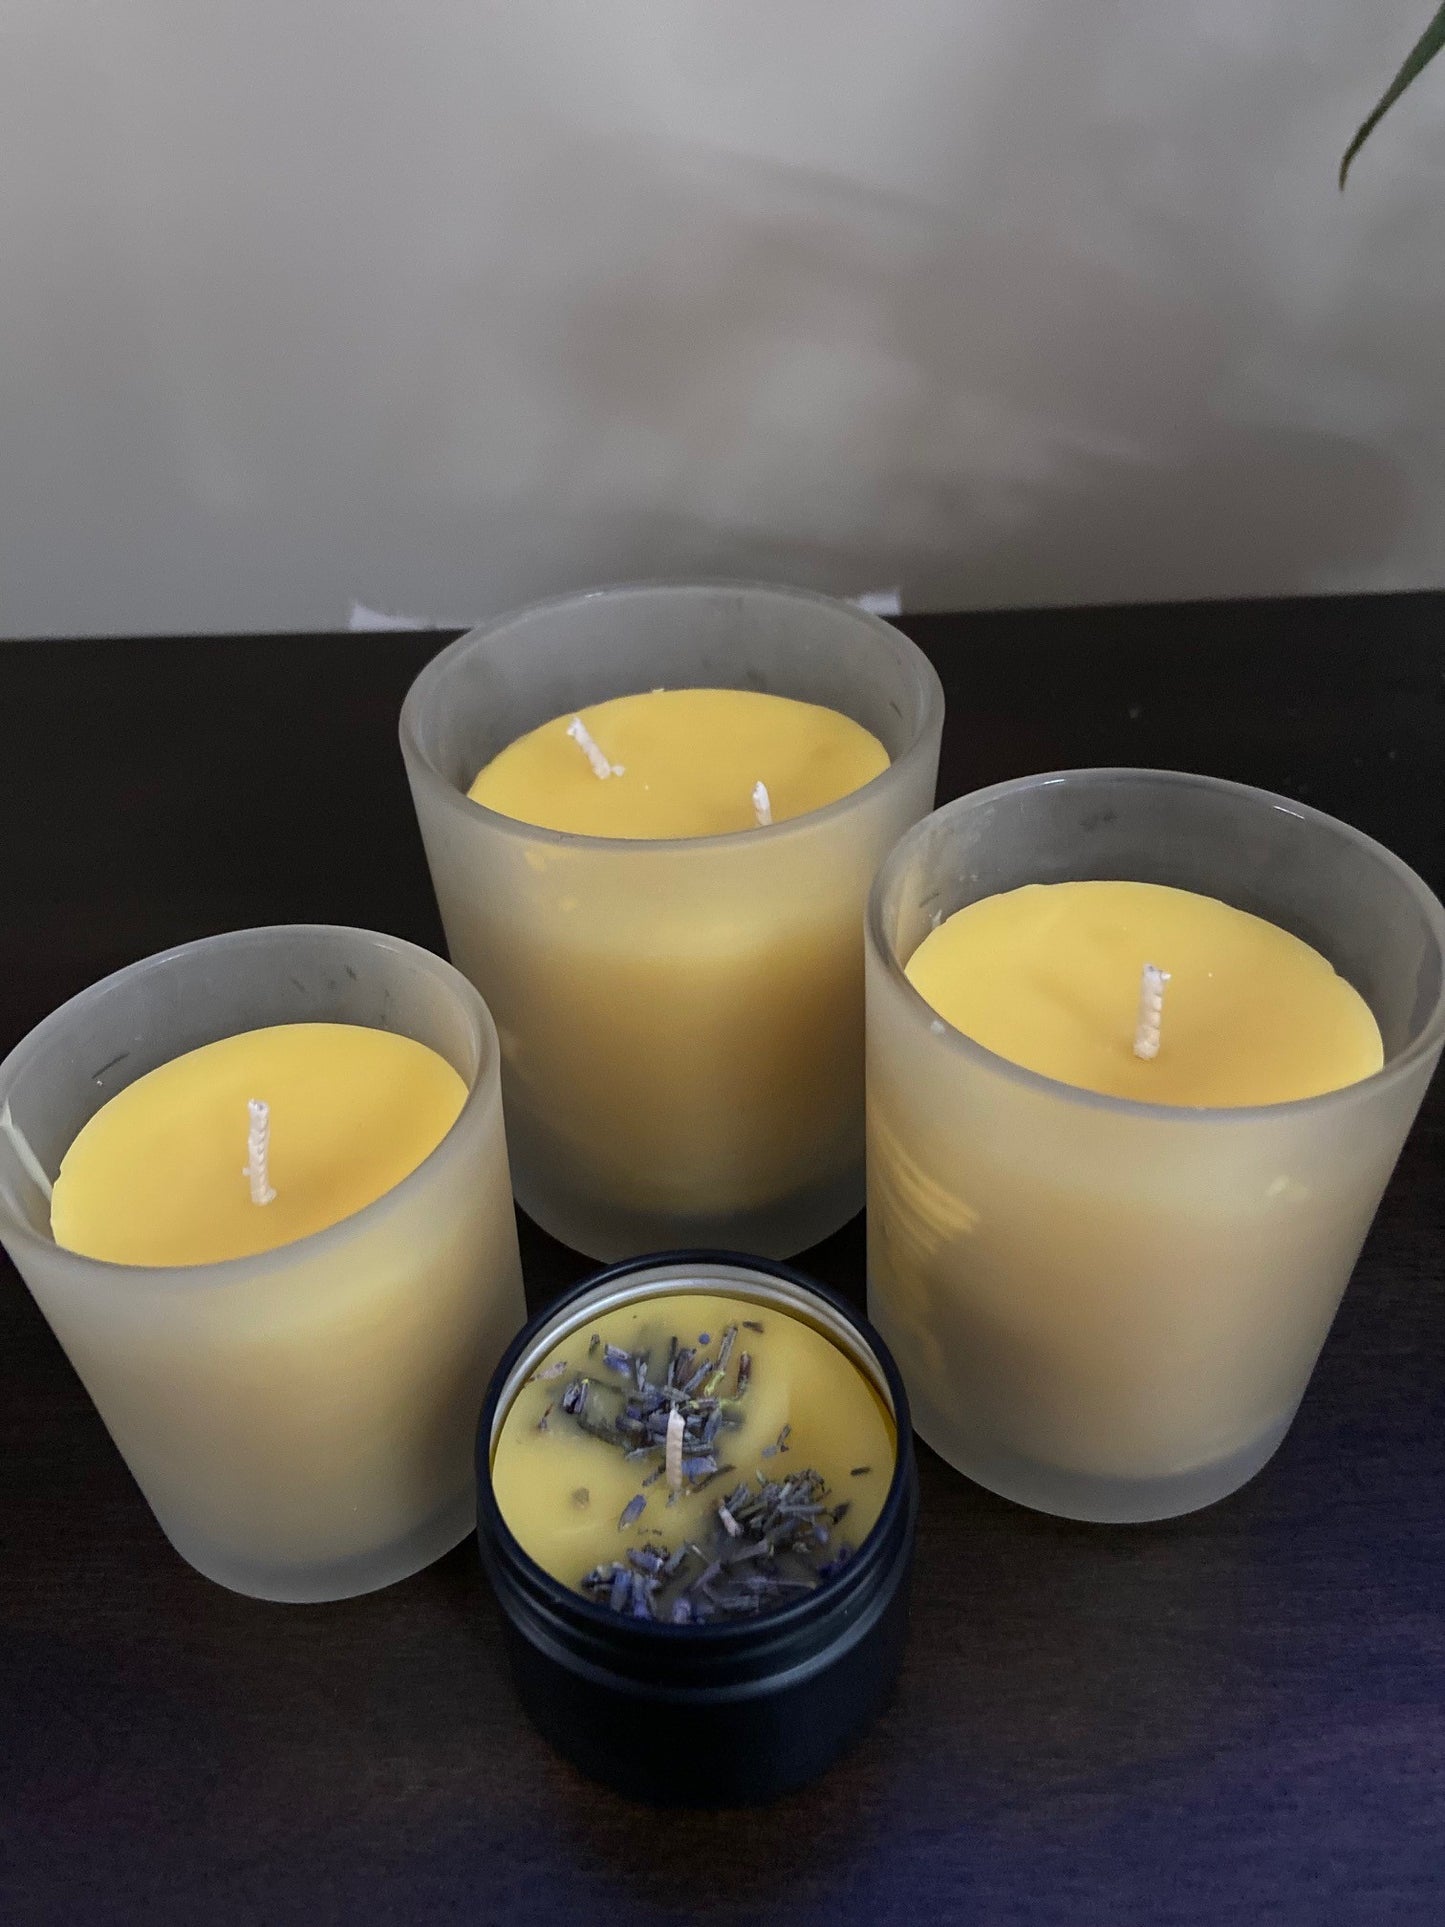 7 oz Beeswax Jar Candle-Natural and Pure, and Scented